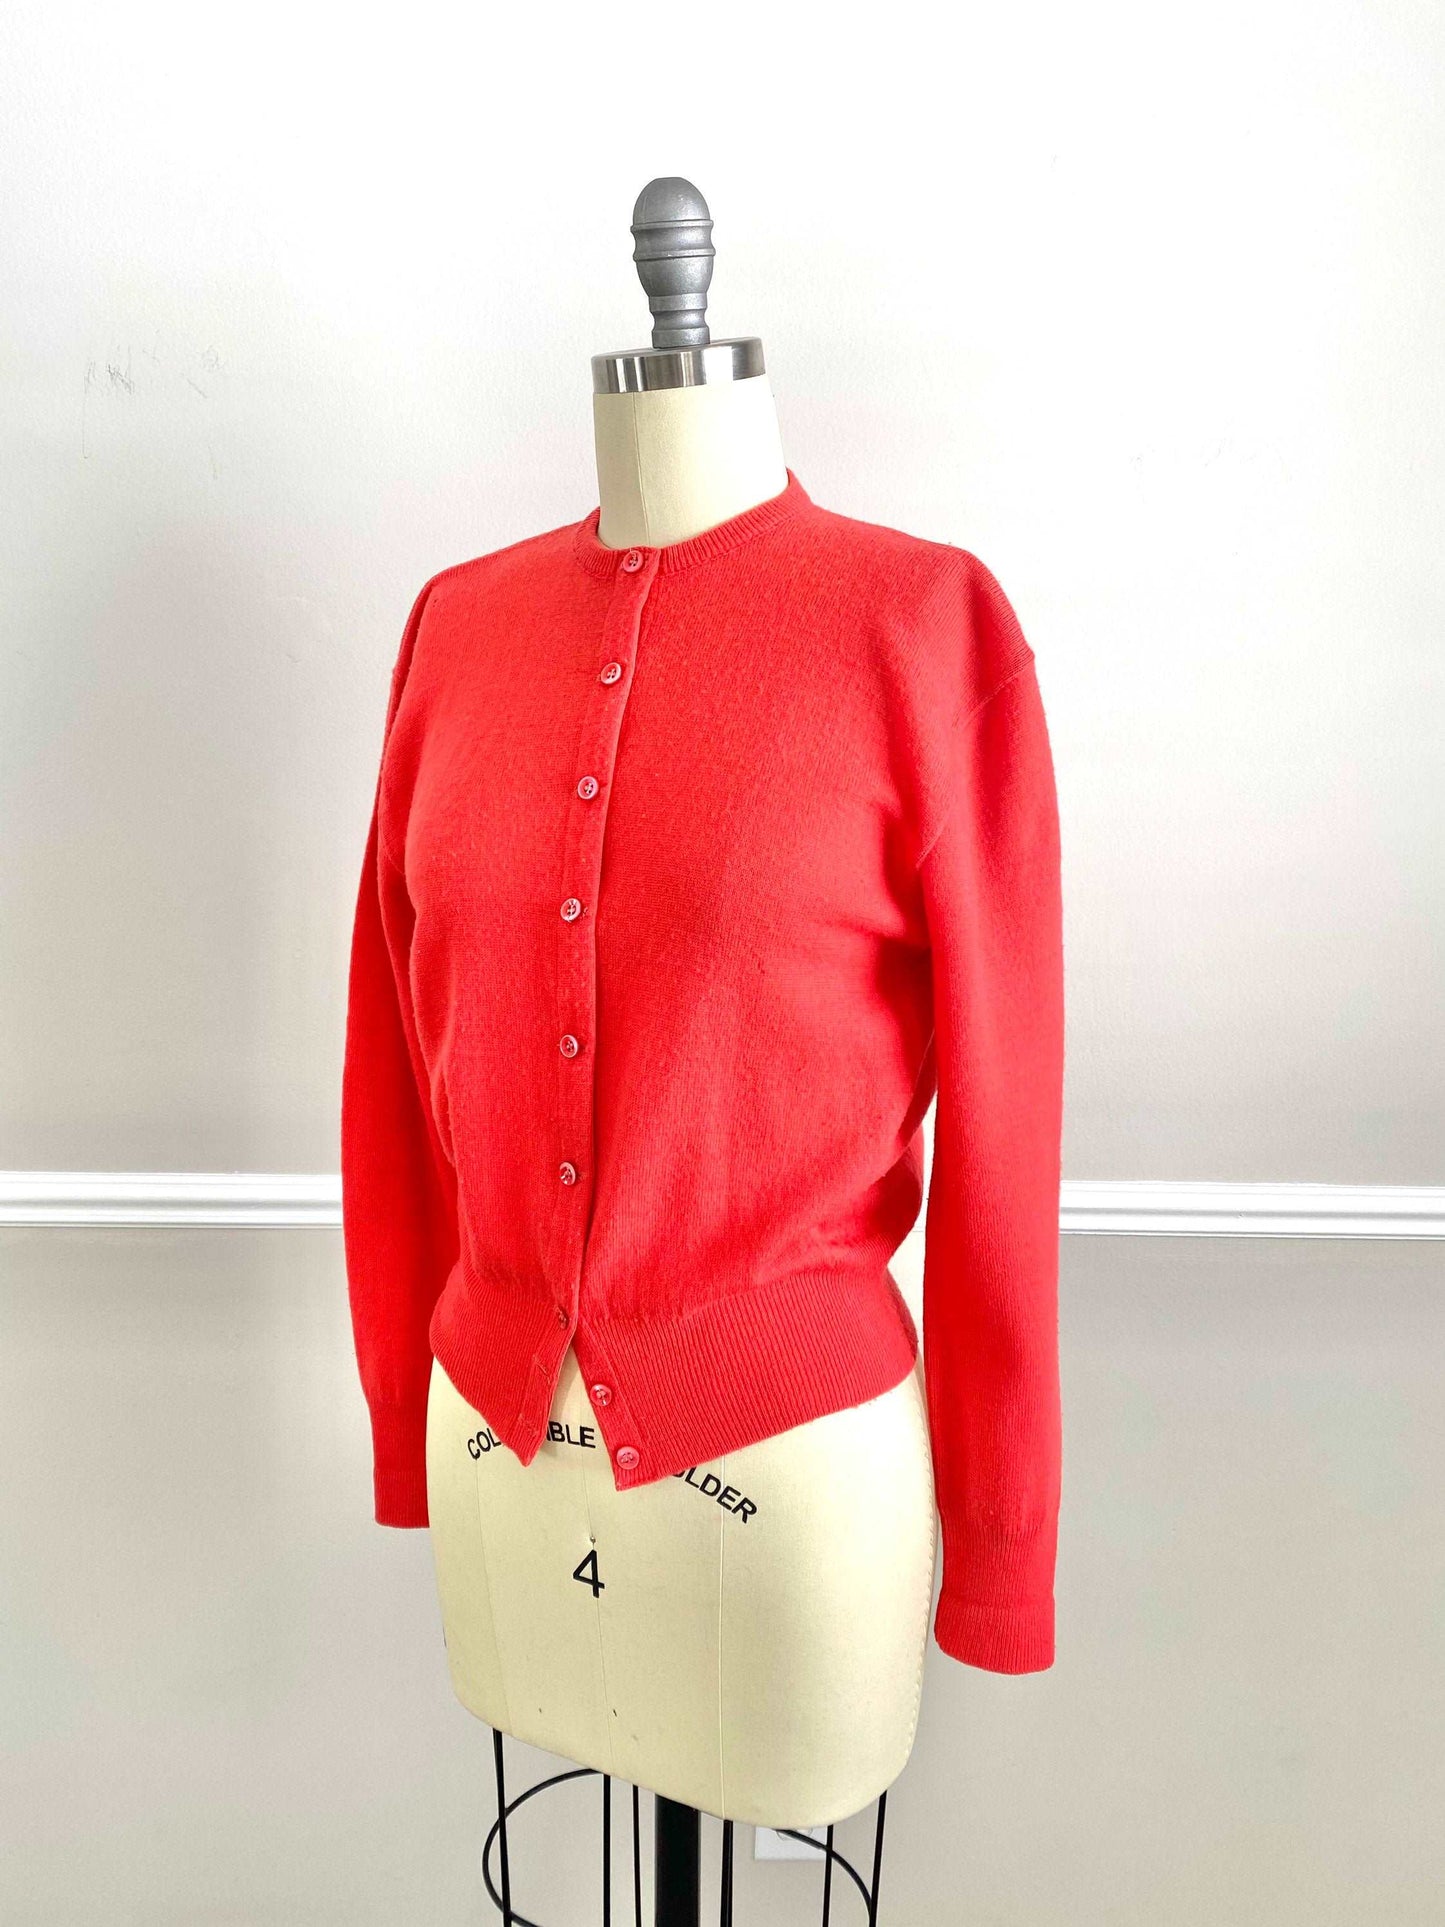 ON SALE Vintage 1940s Pink Coral Cardigan / 40s retro wool sweater size S M